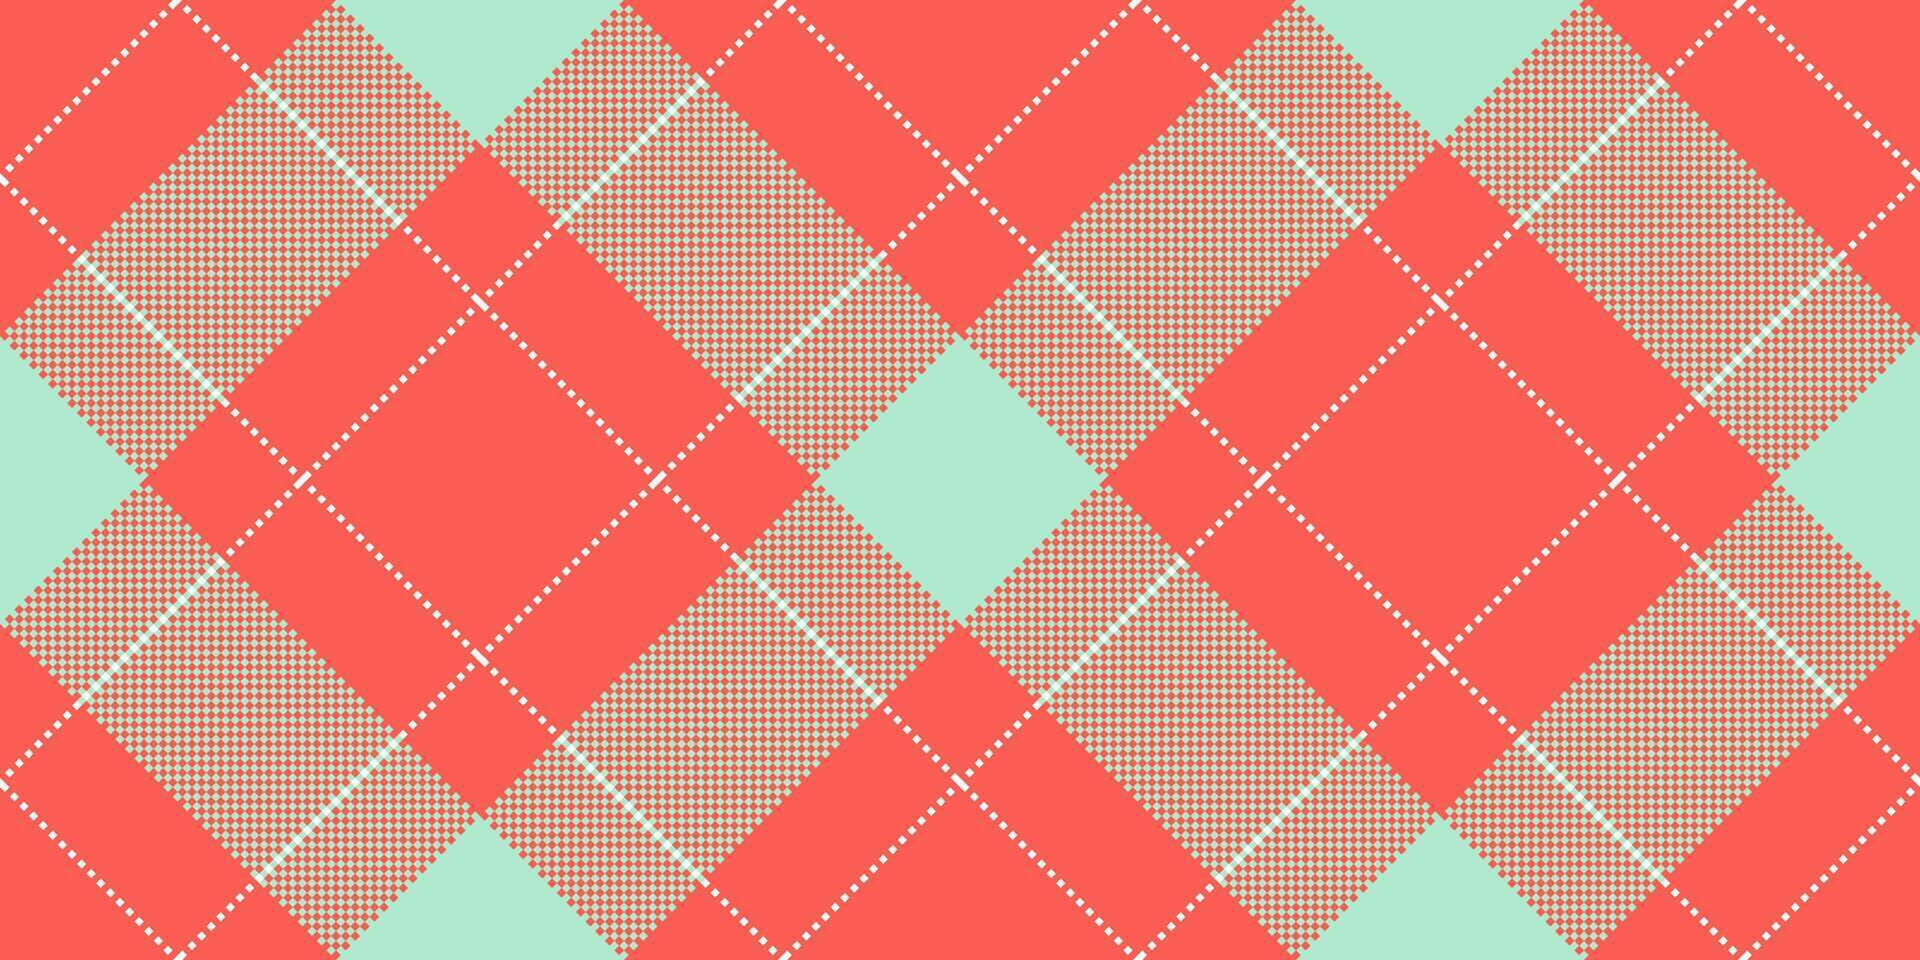 Hunter plaid fabric check, abstract background seamless background textile. Anniversary tartan texture vector pattern in red and light colors.